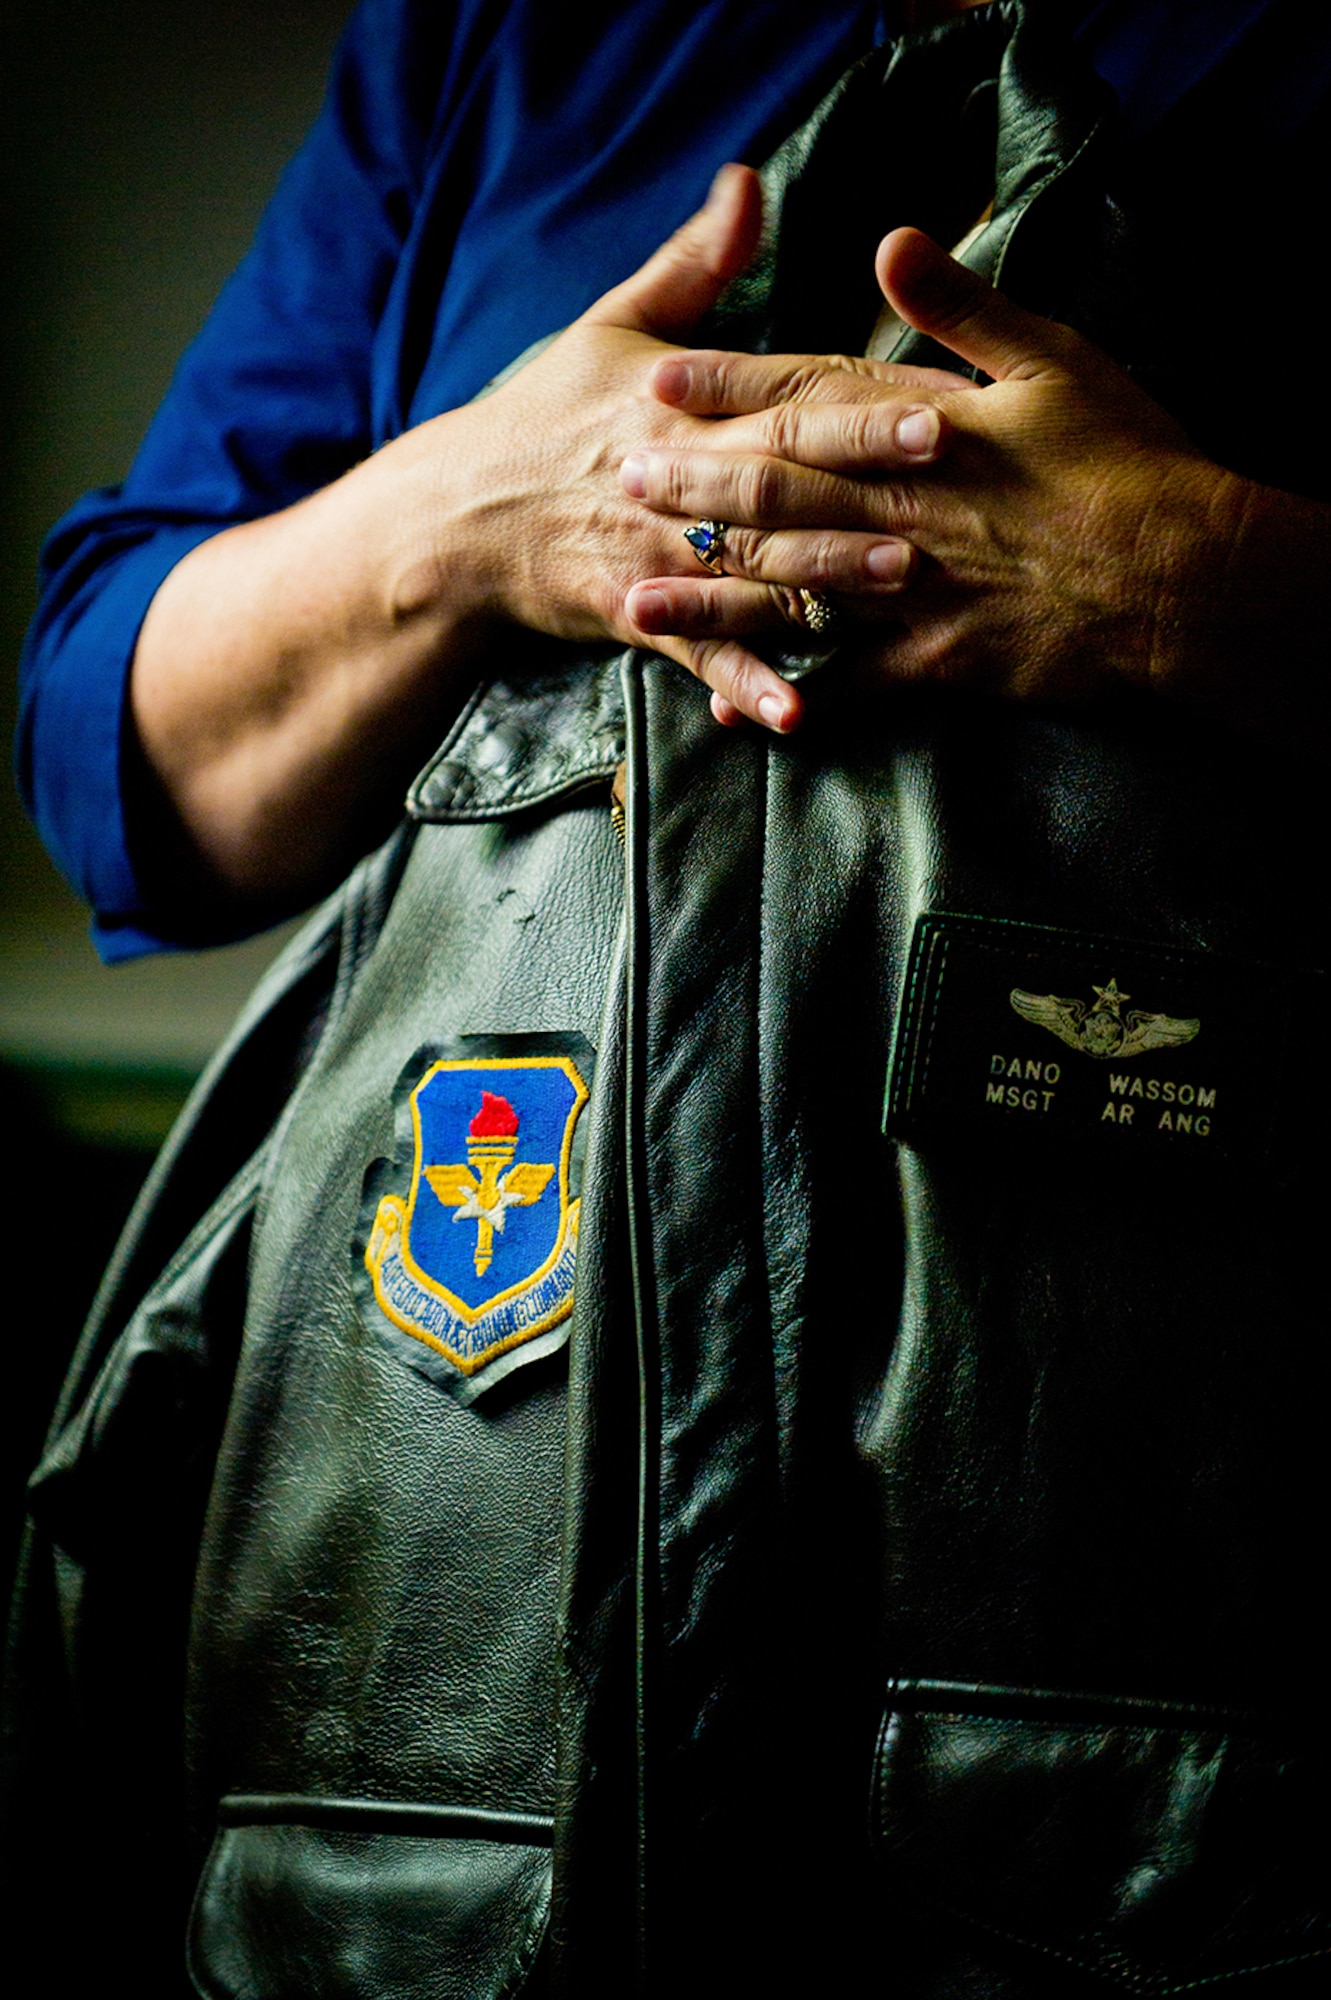 Pamela Wassom, mother of Master Sgt. Daniel R. Wassom II, holds her son’s flight jacket recovered from Master Sgt. Wassom’s destroyed home. (U.S. Air Force photo by Tech. Sgt. Sarayuth Pinthong/ Released)